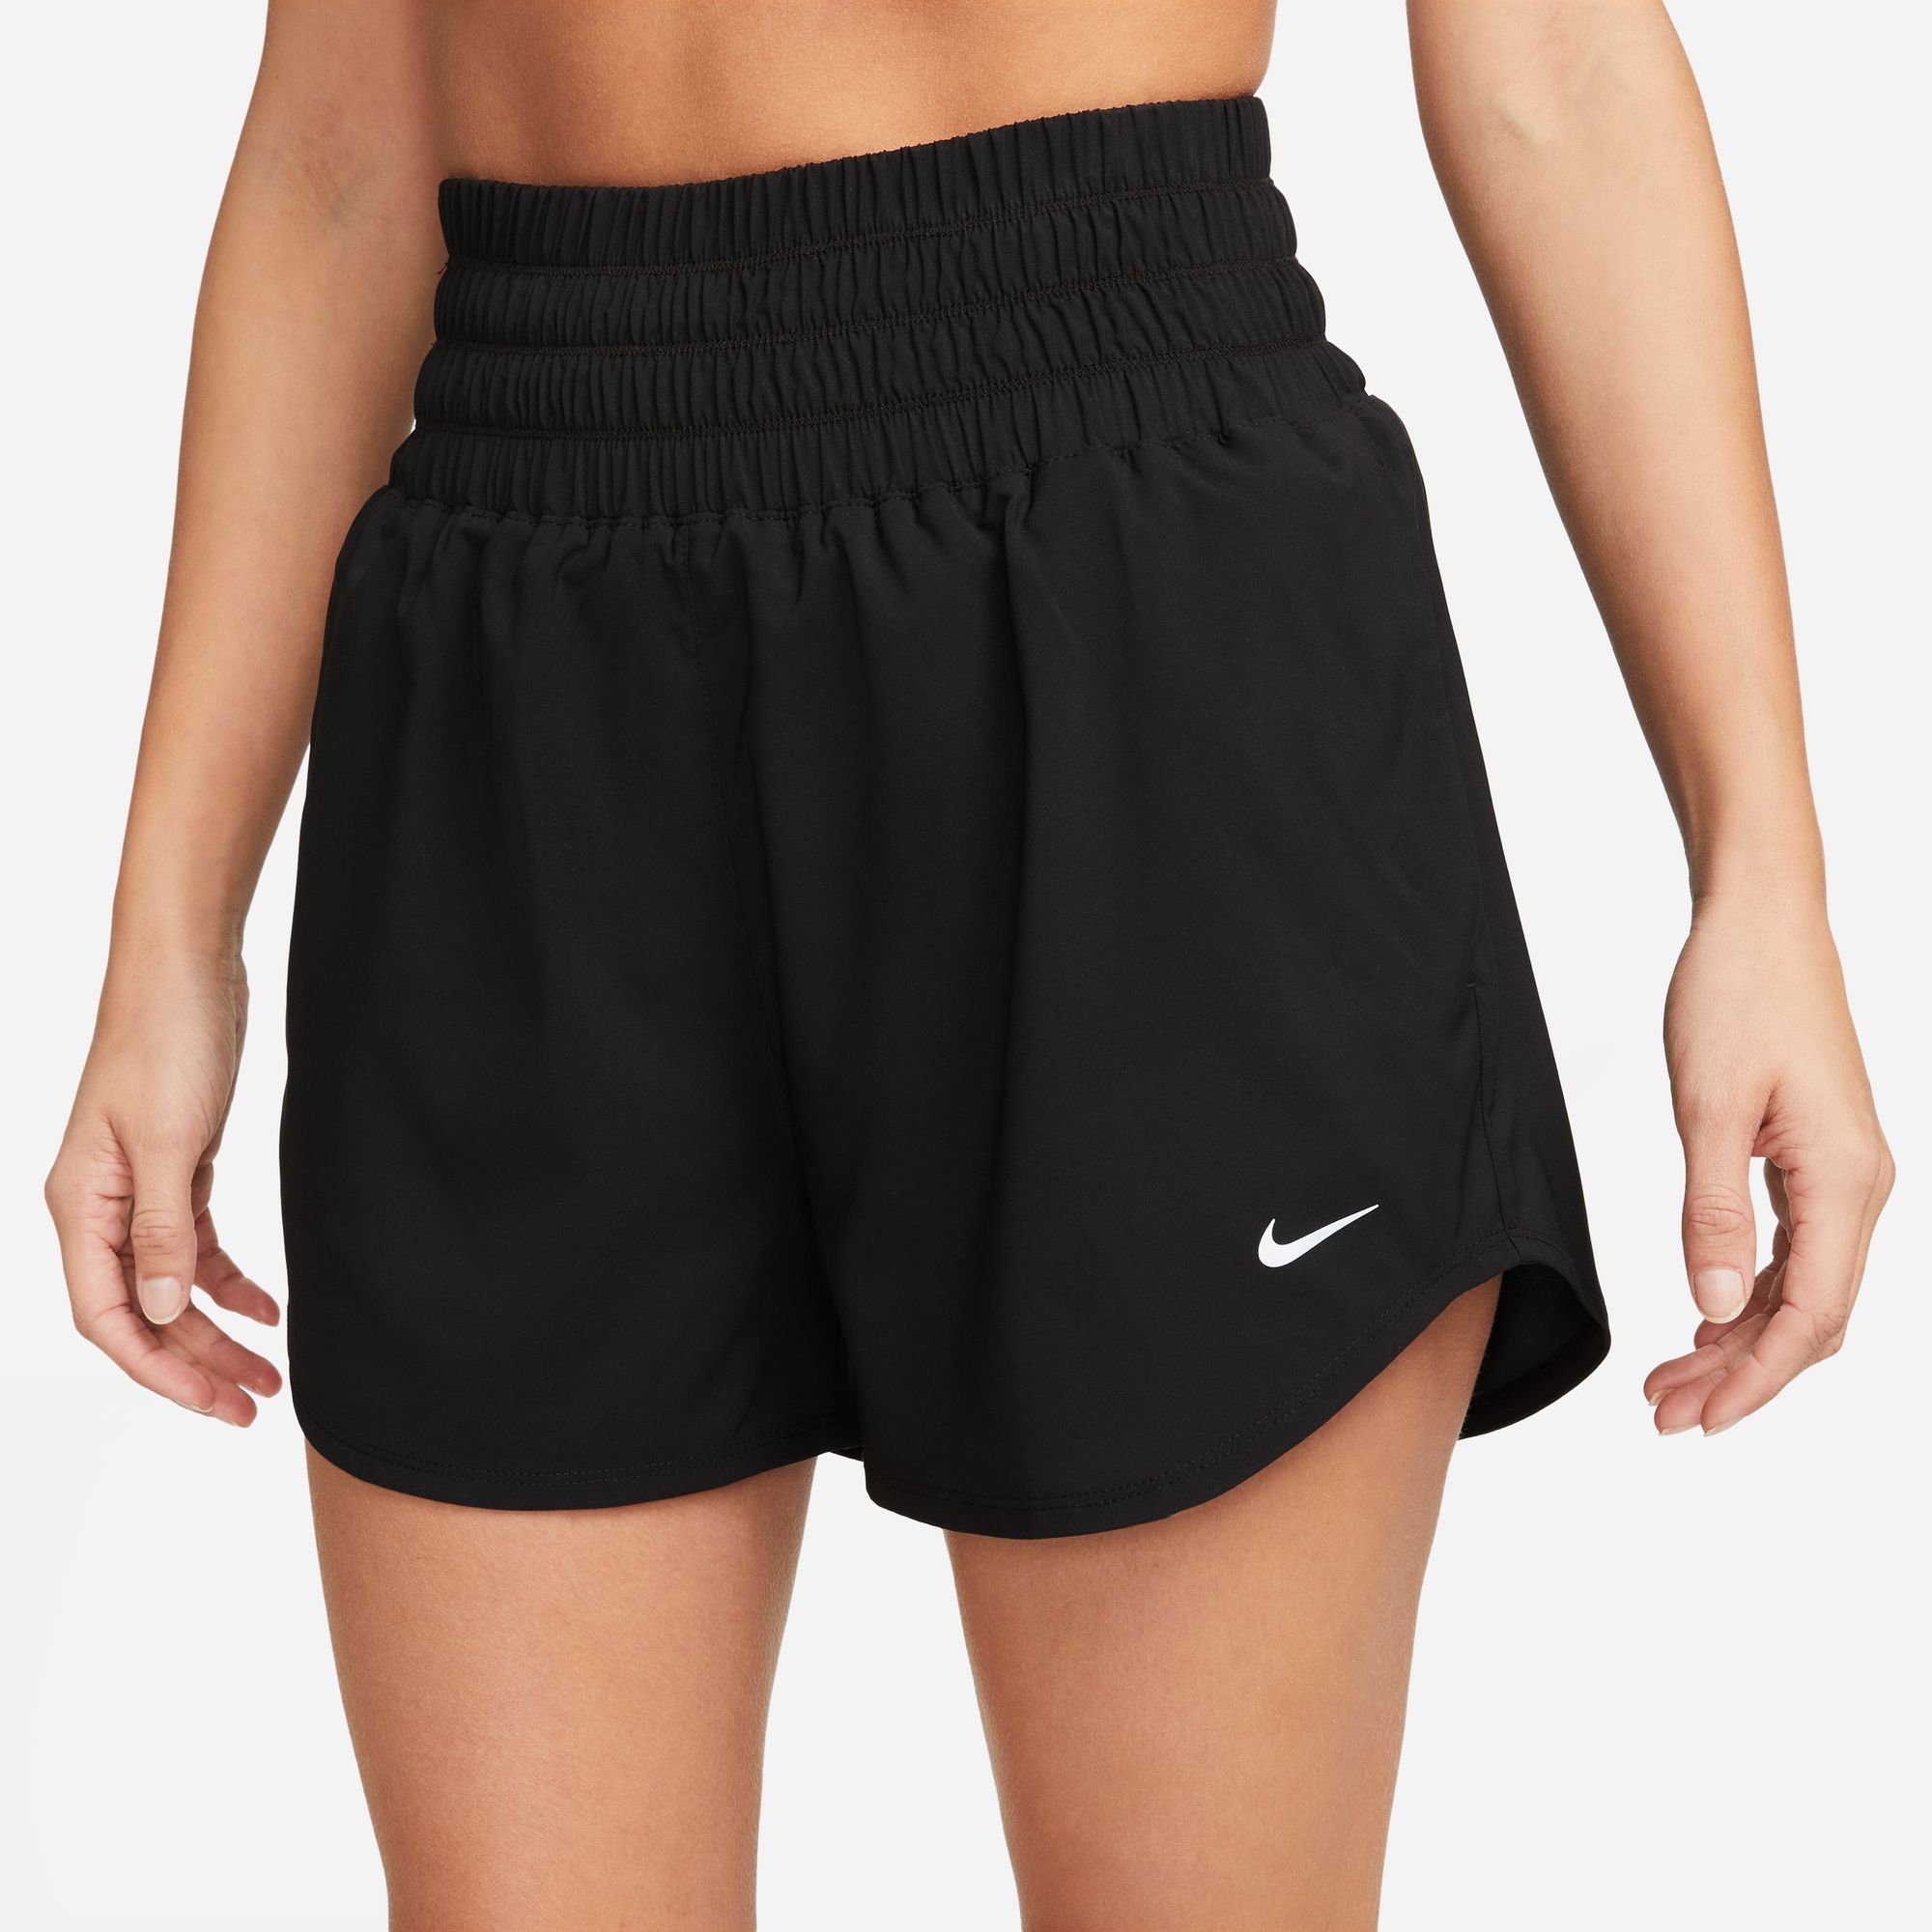 SHORTS Trainingsshorts HIGH-WAISTED Nike WOMEN'S DRI-FIT ONE ULTRA BRIEF-LINED